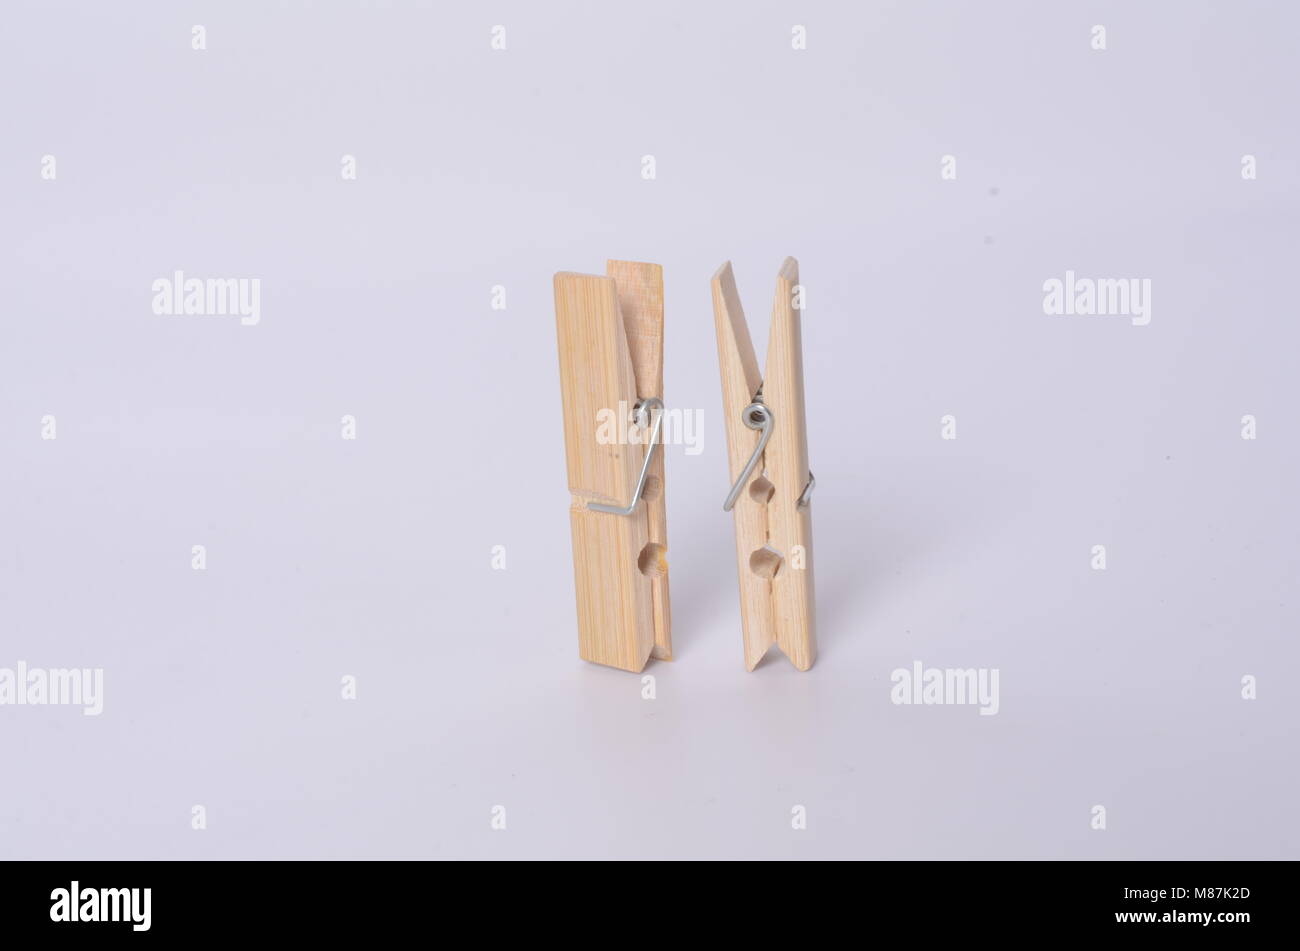 Some clothespins making a chain. It draws an abstract 69 number. Some wooden clothespins. Stock Photo